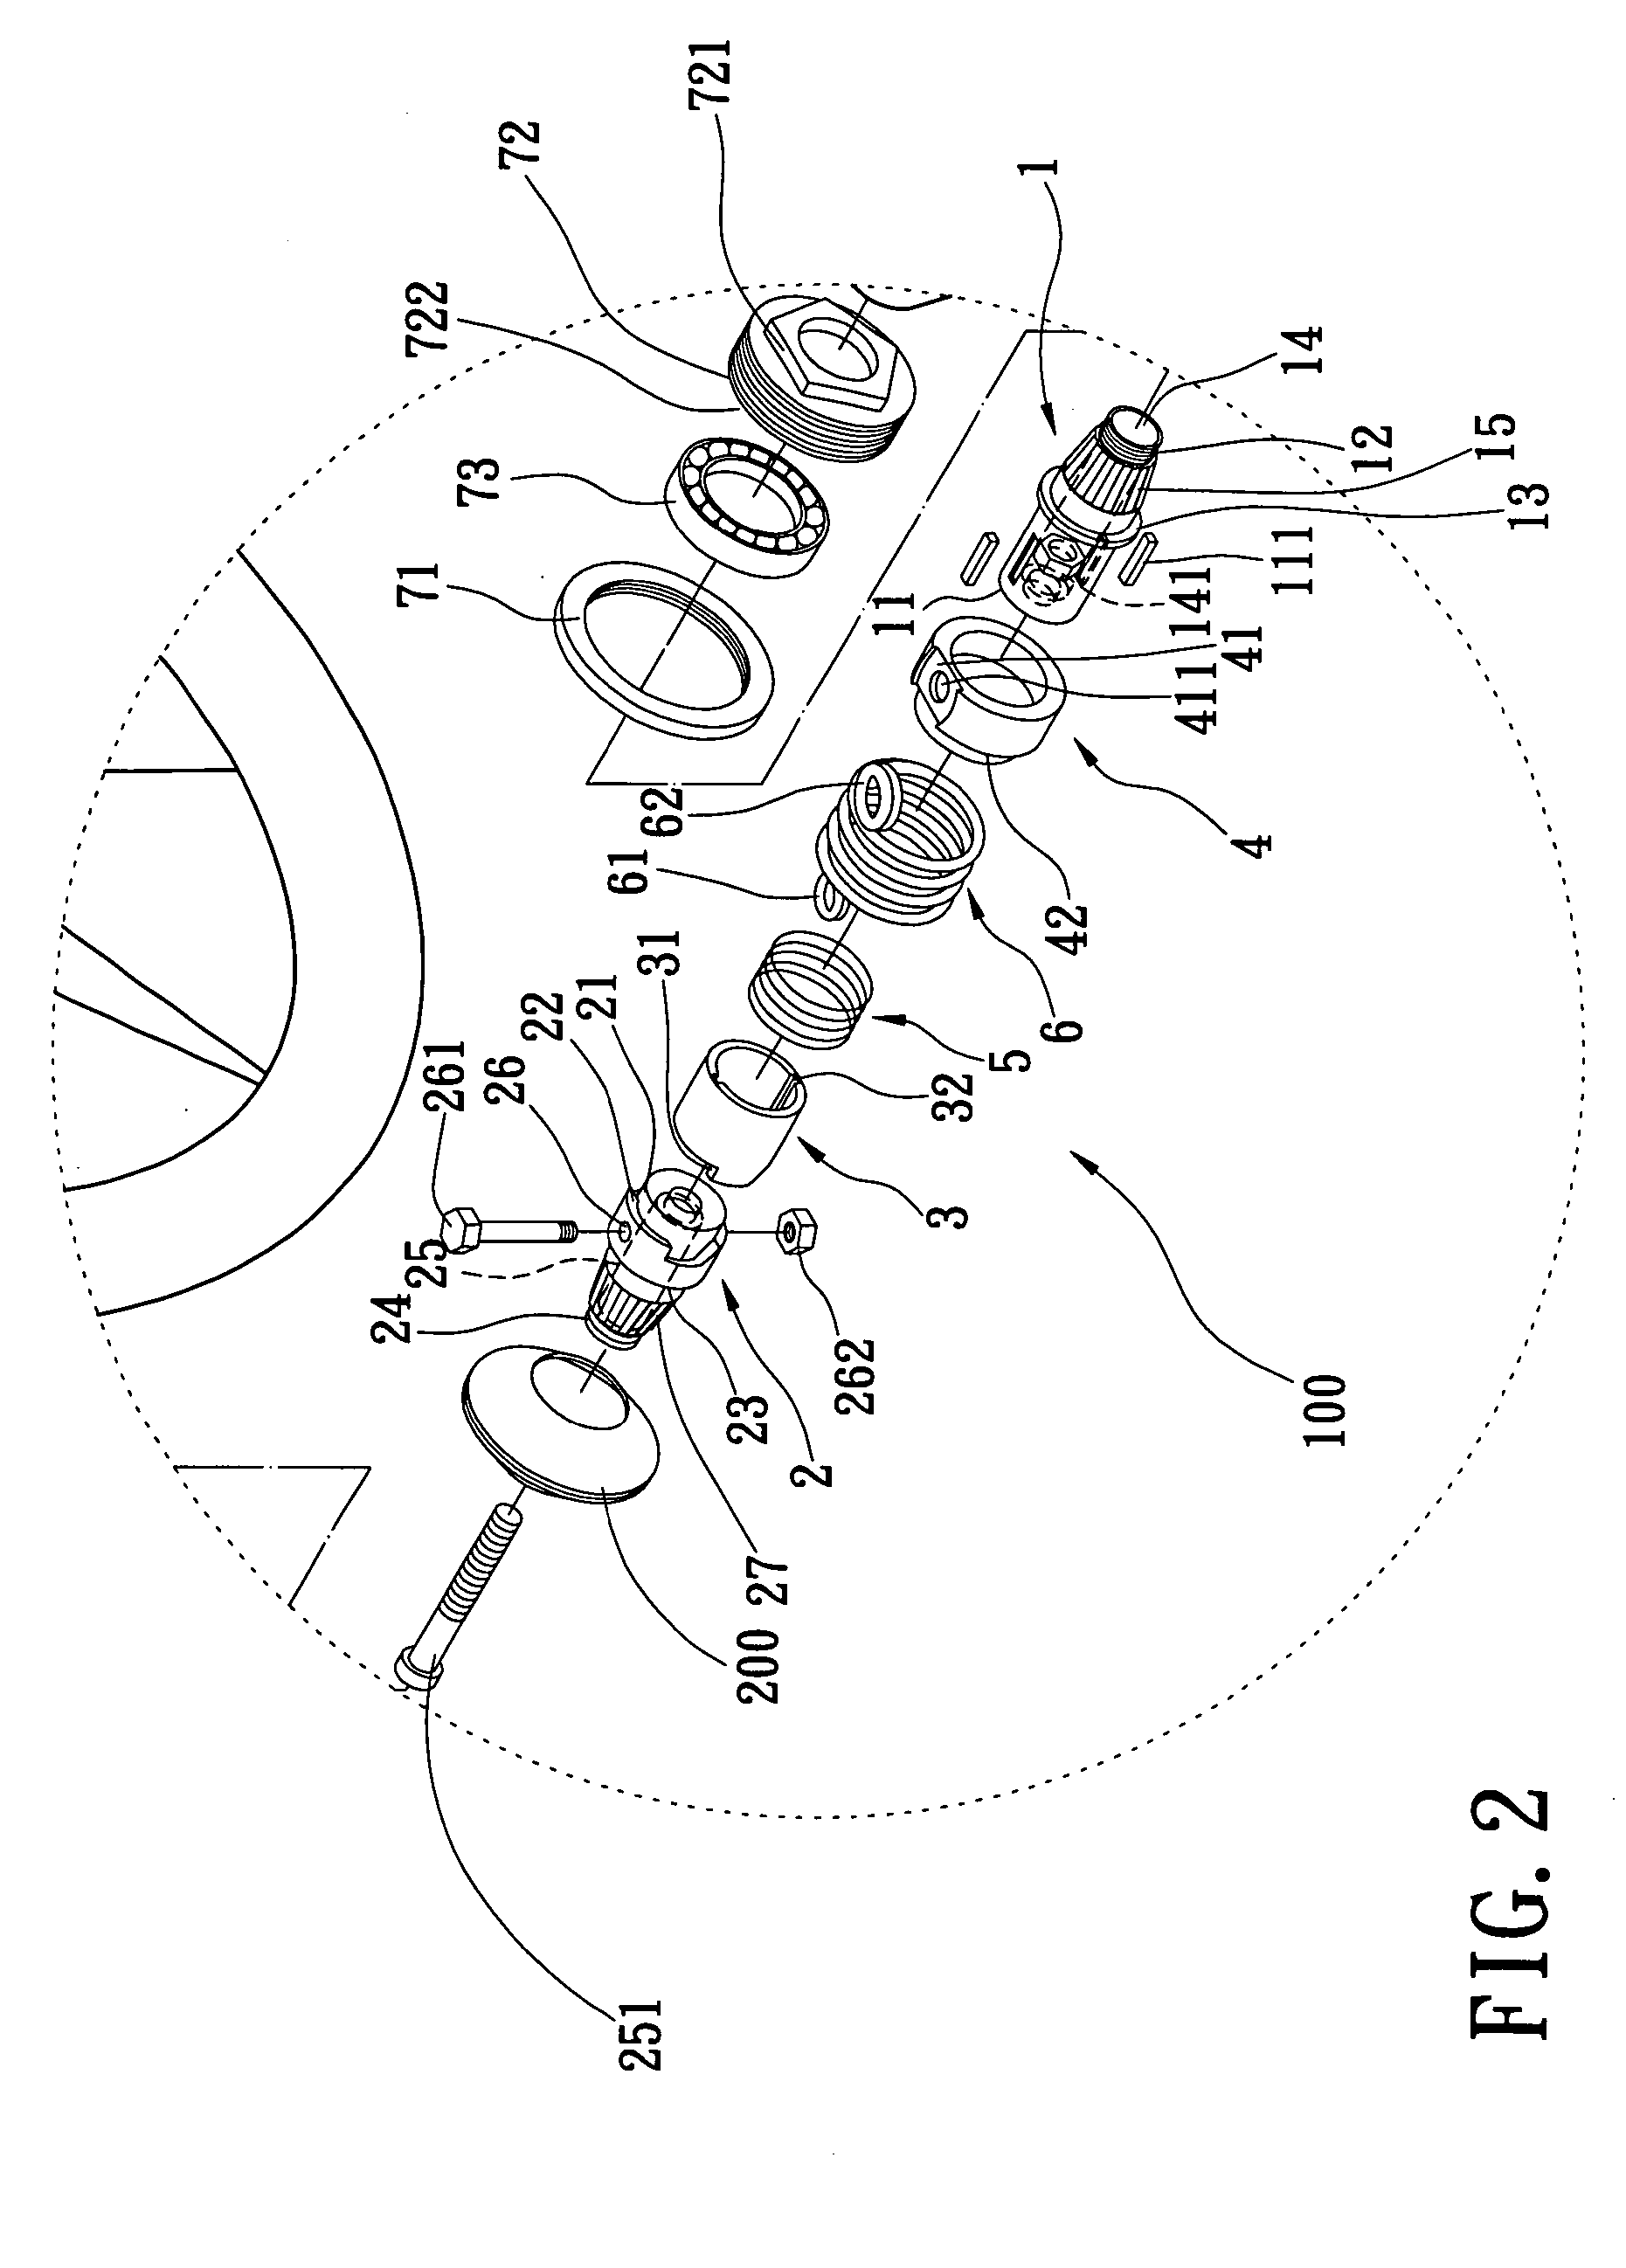 Pedal shaft structure of a bicycle having a second pedaling function